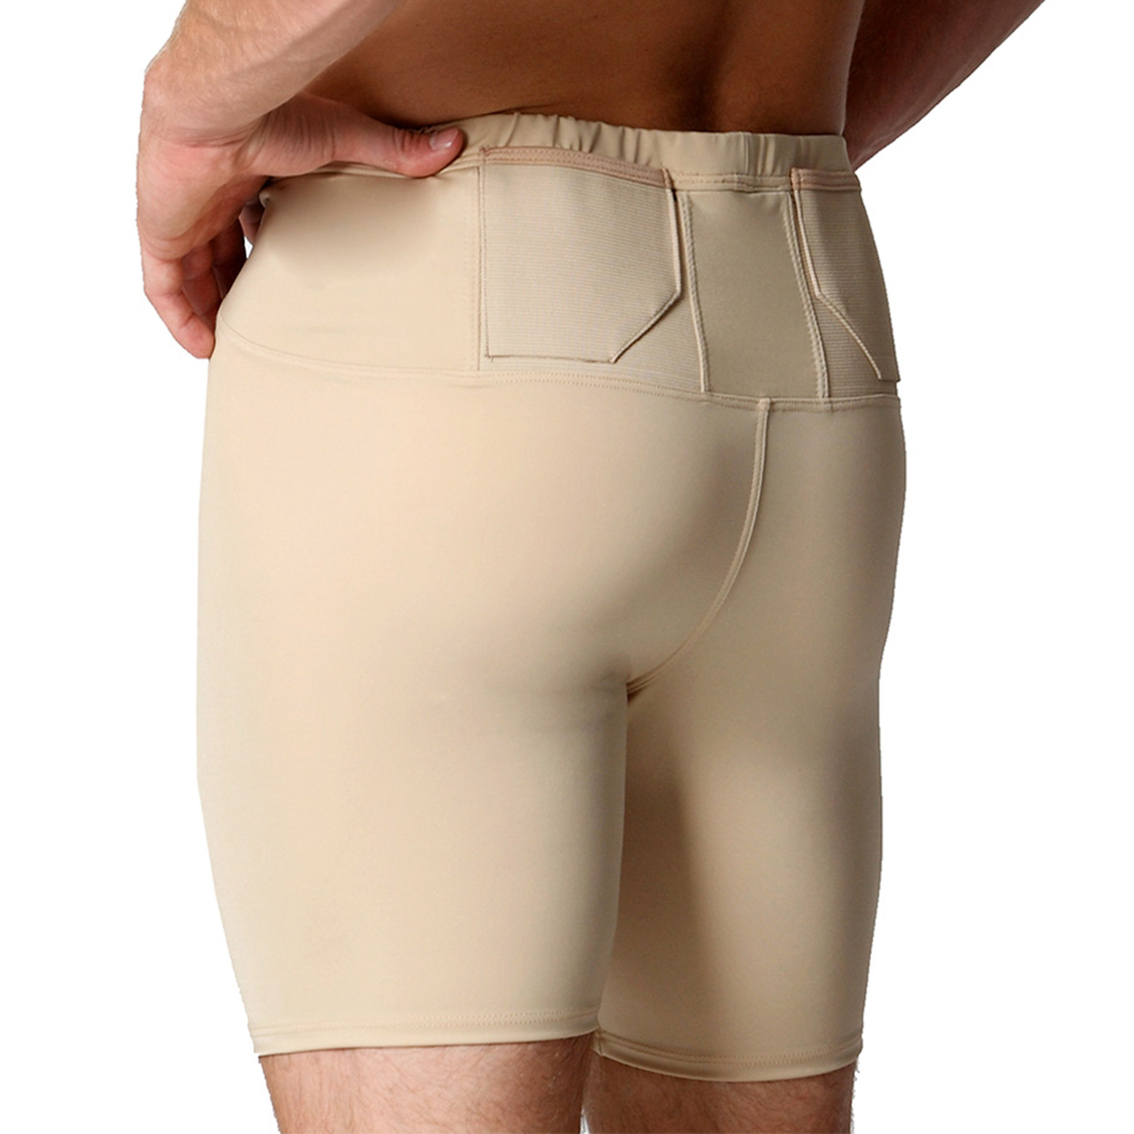 ISPro Tactical Men's Concealed Carry Undershorts - Image 2 of 4